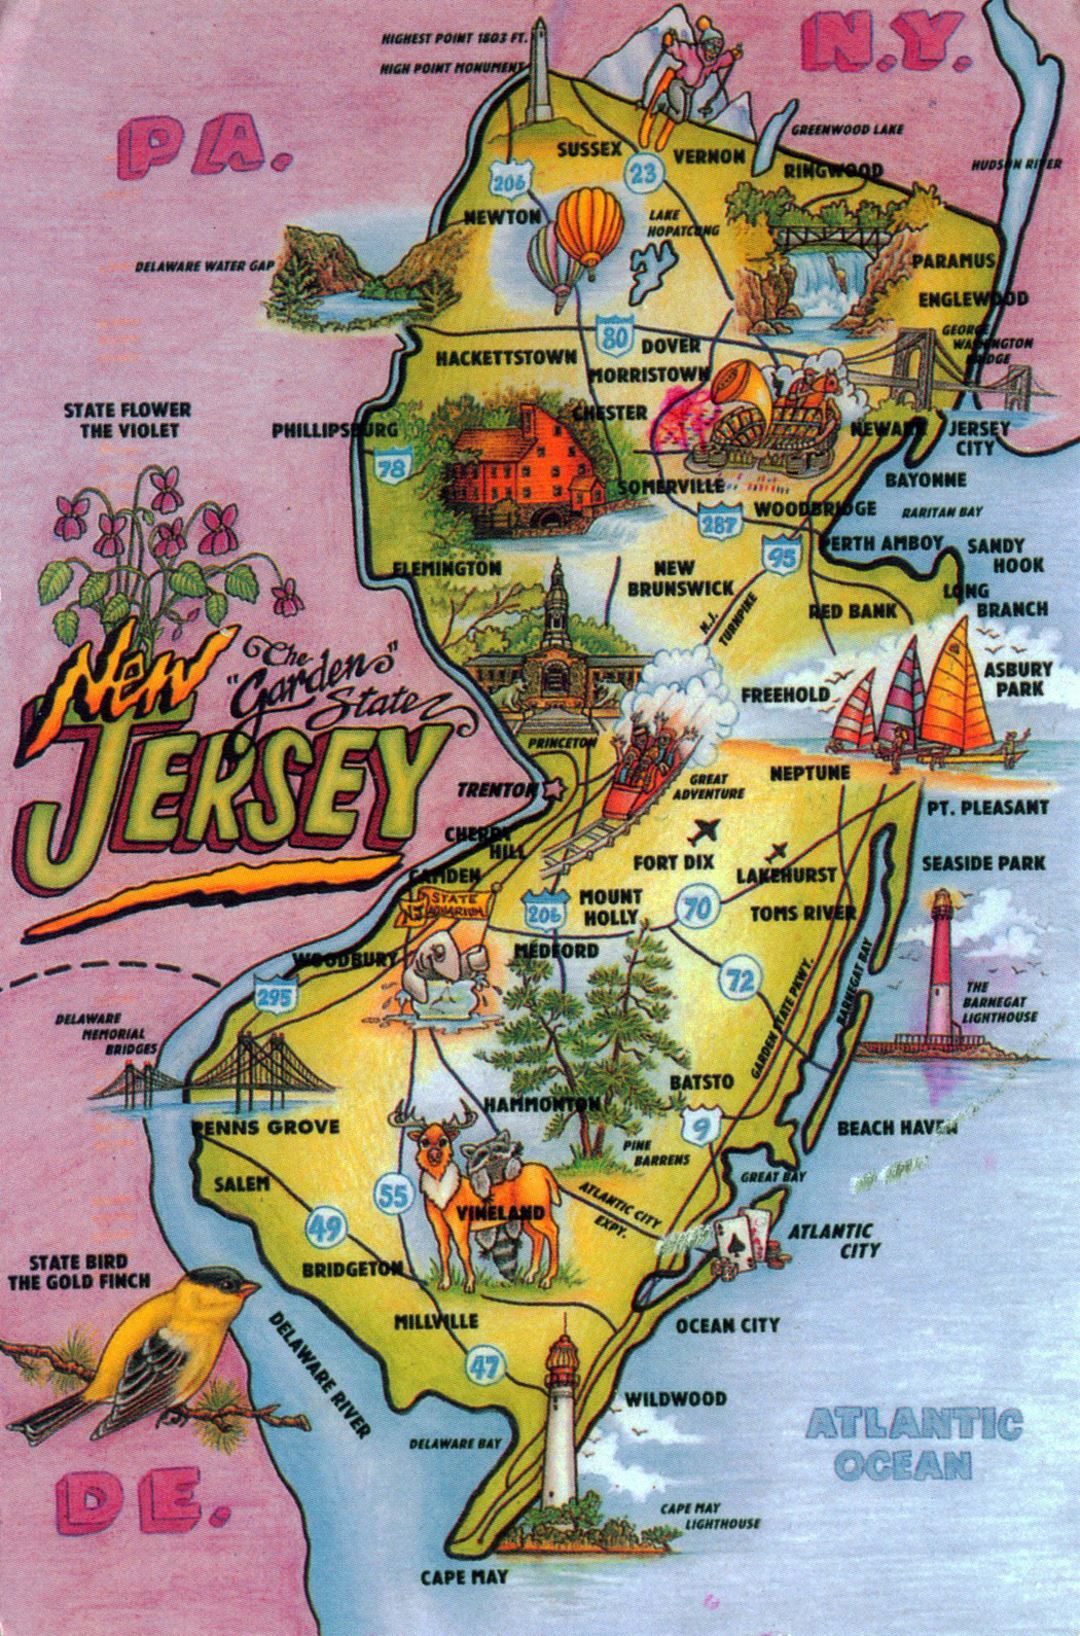 Detailed tourist illustrated map of New Jersey state